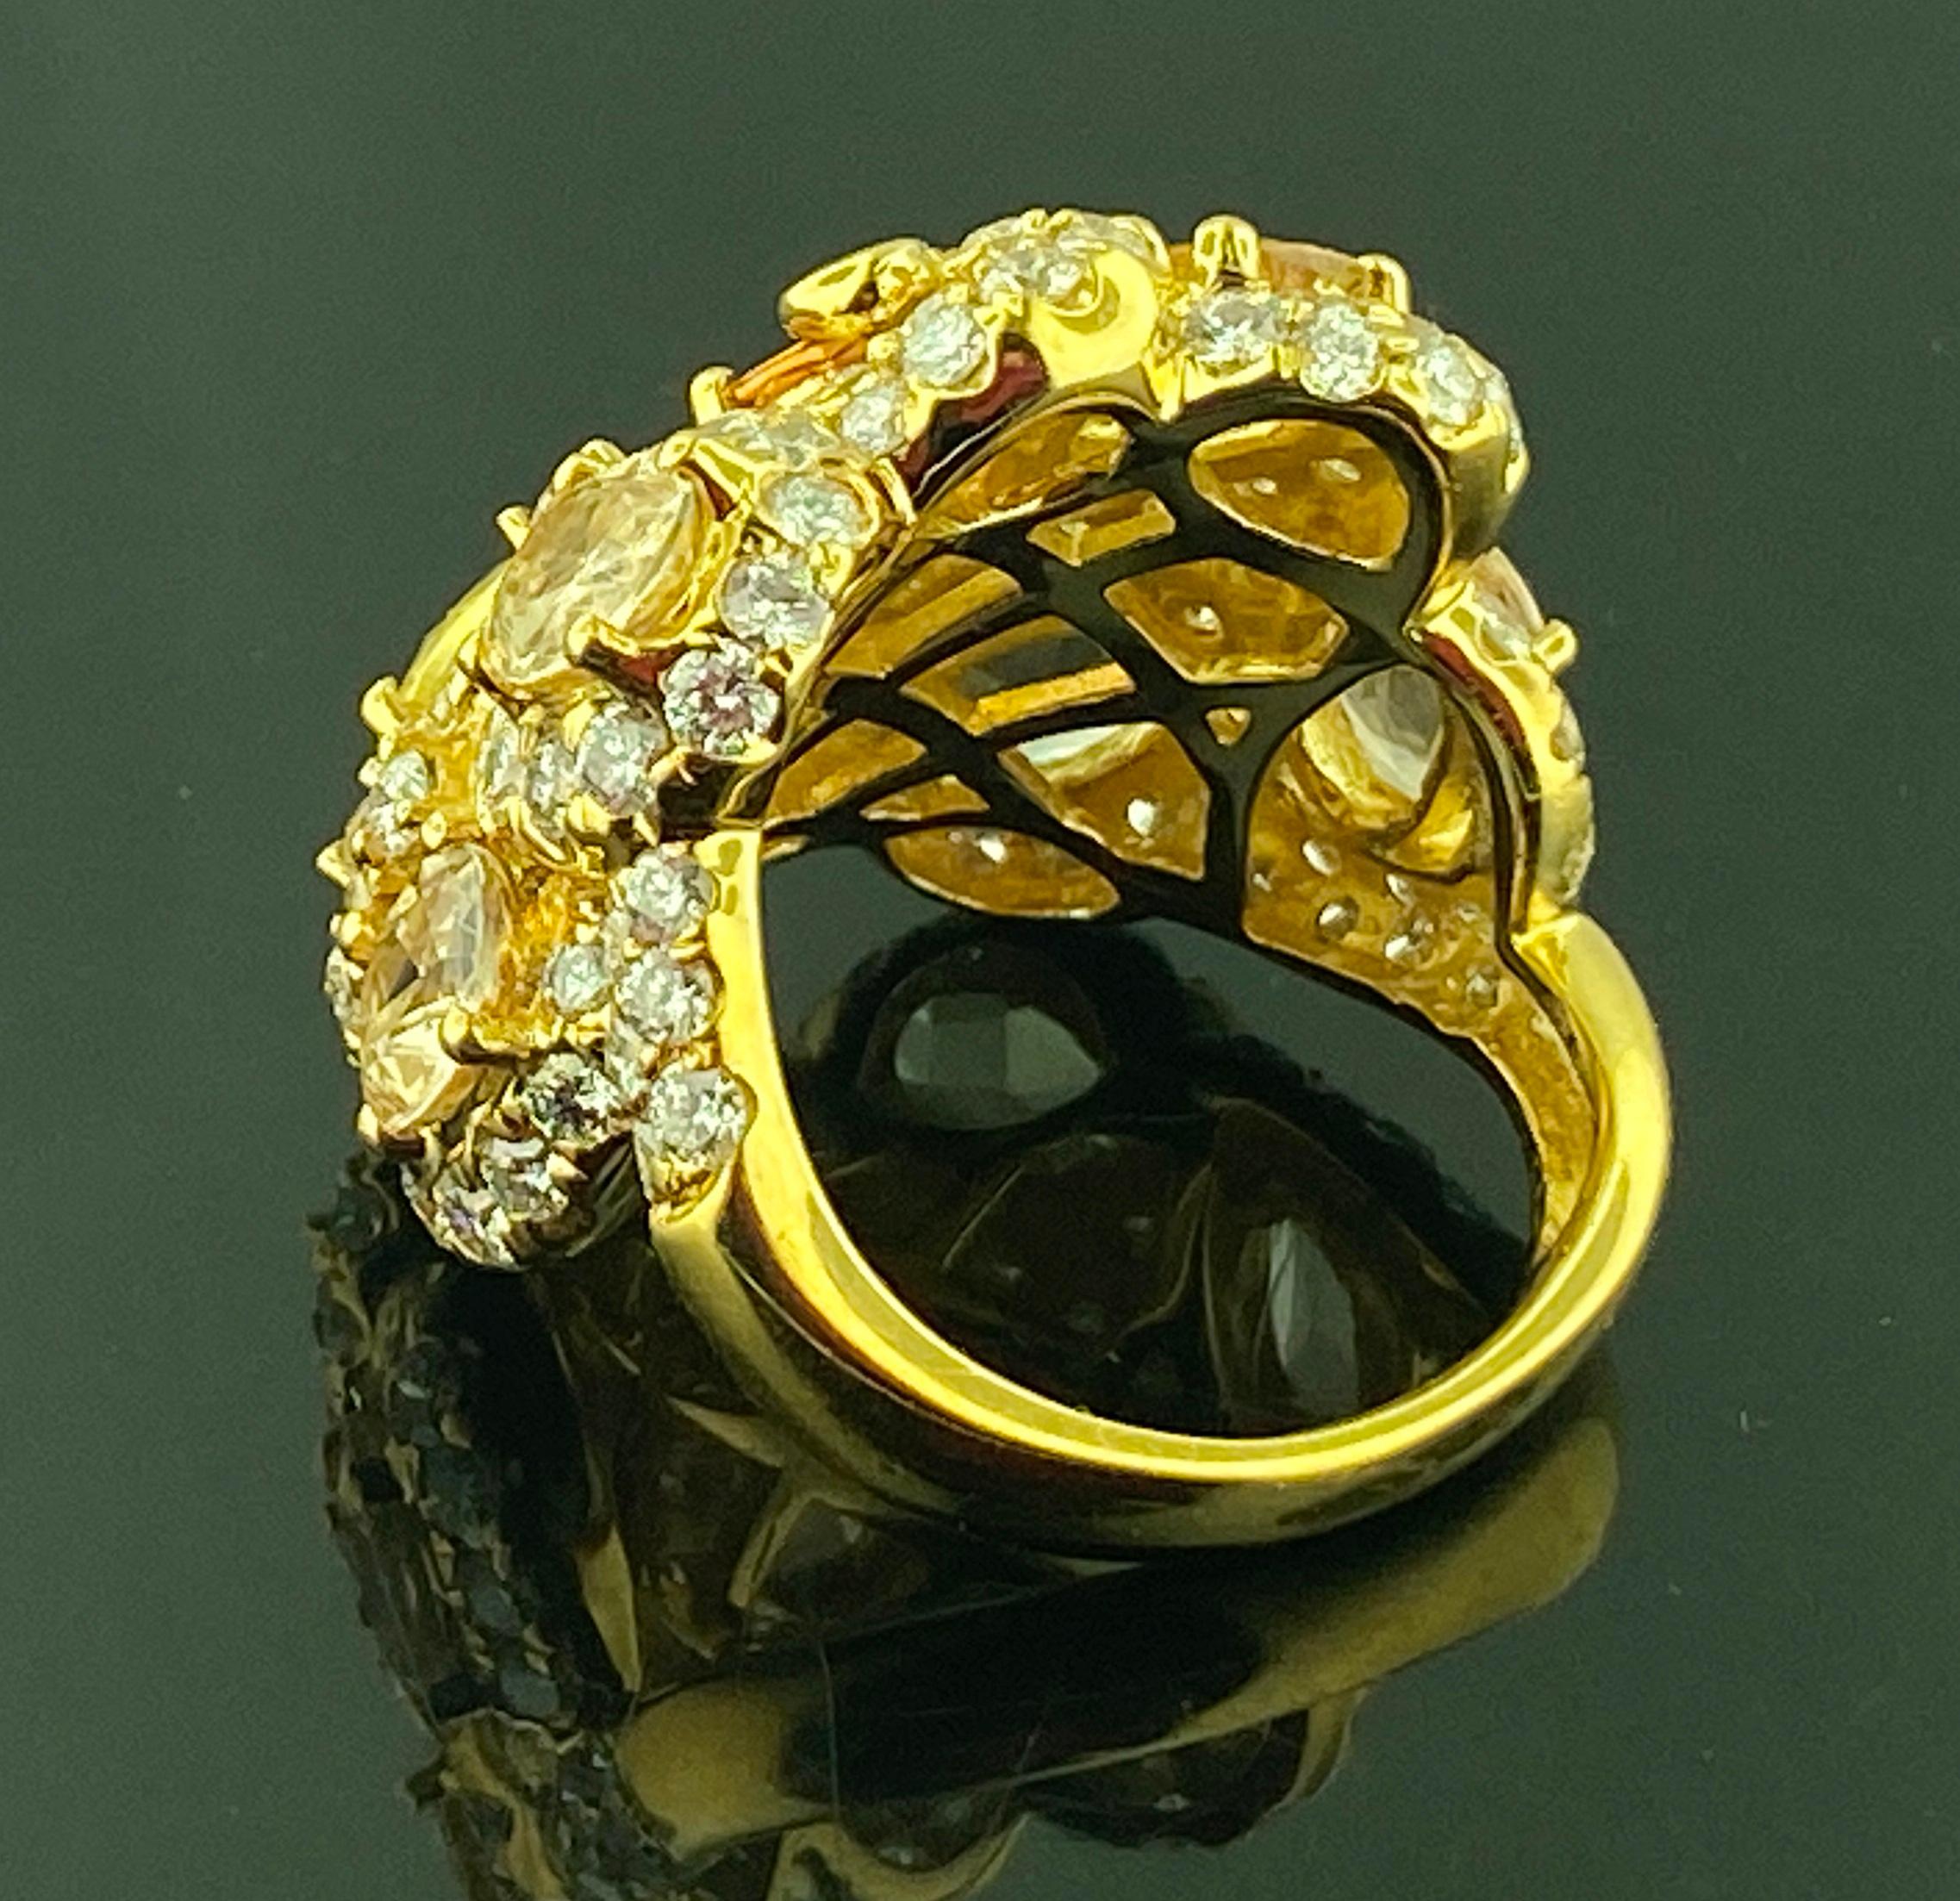 Set in 18 karat yellow gold, weighing 15.63 grams, are 7 Oval Sapphires - 6 Yellow and One Orangey Brown - weighing a total of 8.75 carats accented with 100 Round Brilliant Cut diamonds weighing a total of 3.00 carats having a Color Range of: F-G,